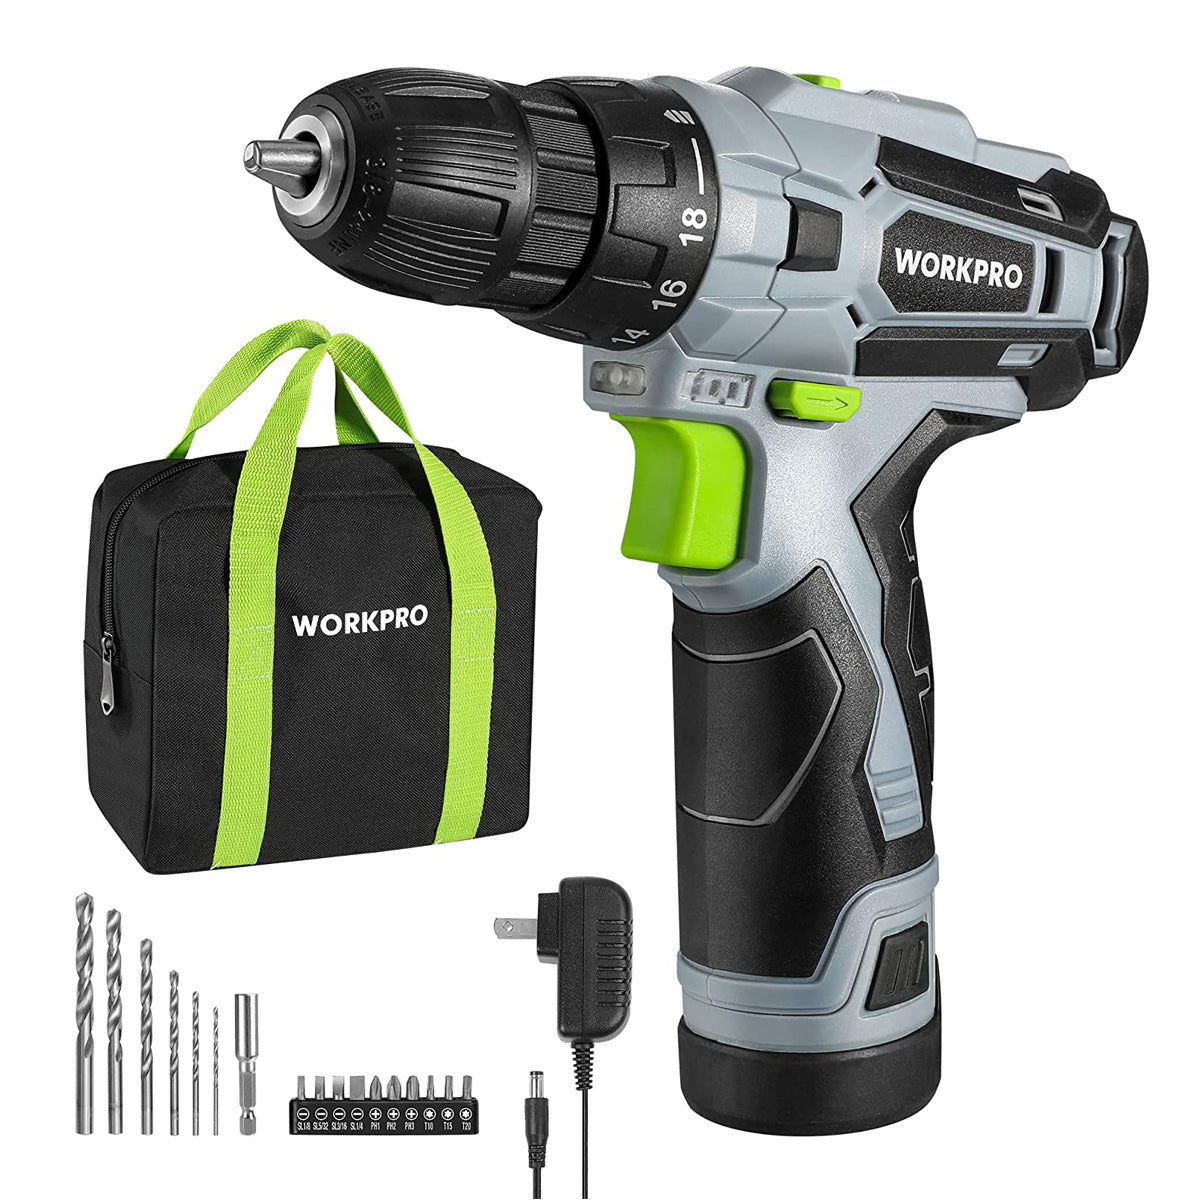 WORKPRO 12V Electric Cordless Drill Driver Kit 3/8